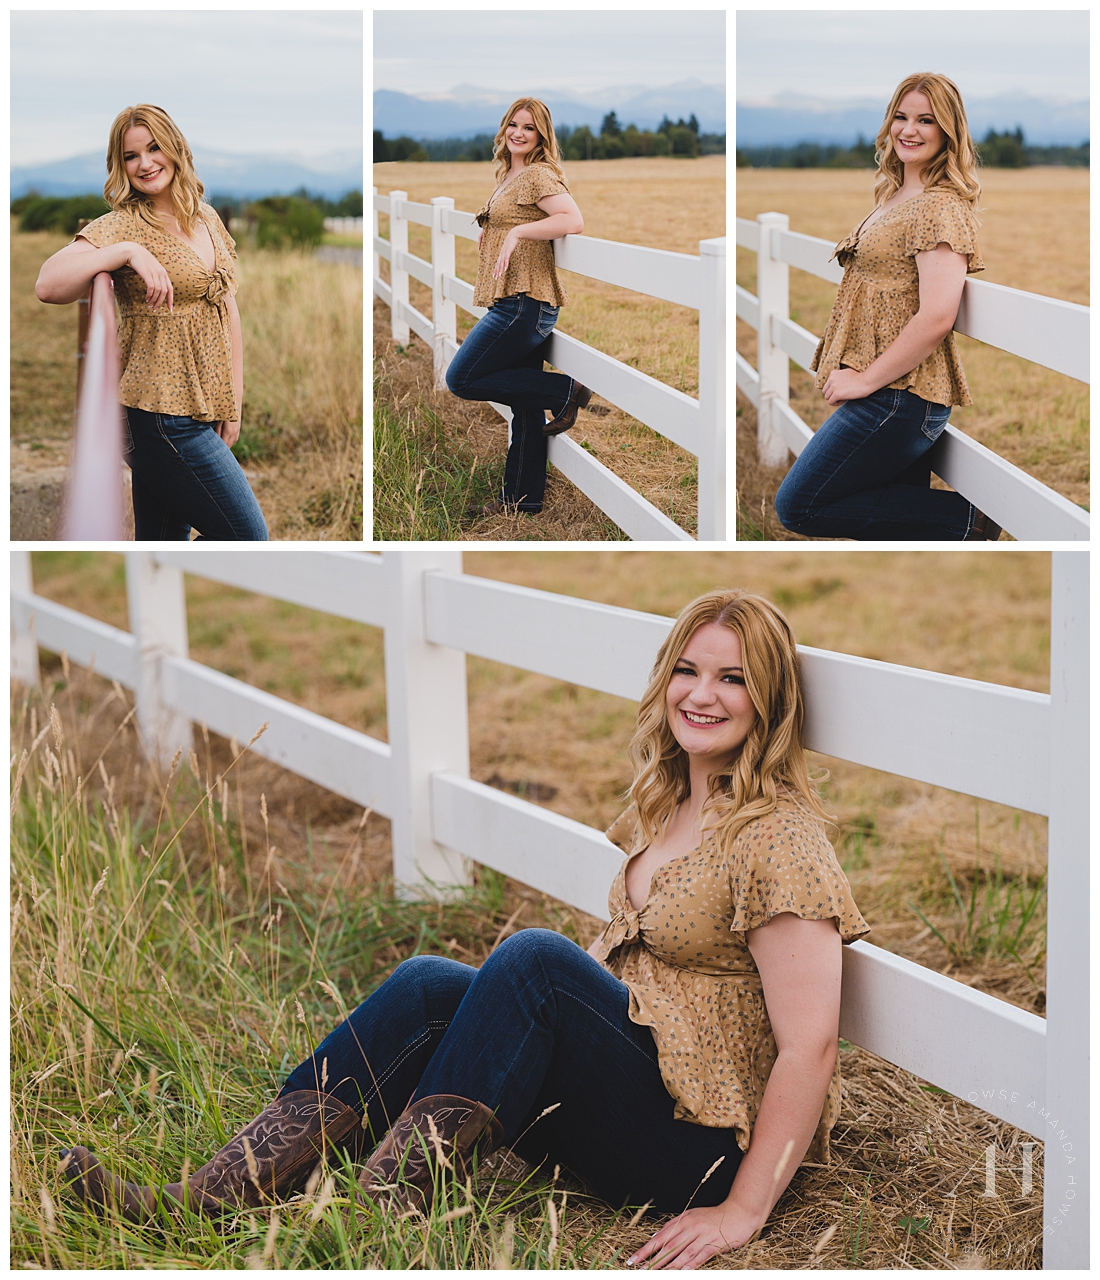 Rustic Senior Portraits with White Picket Fence | Cute Senior Portrait Outfits for a Country Vibe | Photographed by the Best Tacoma Senior Photographer Amanda Howse Photography